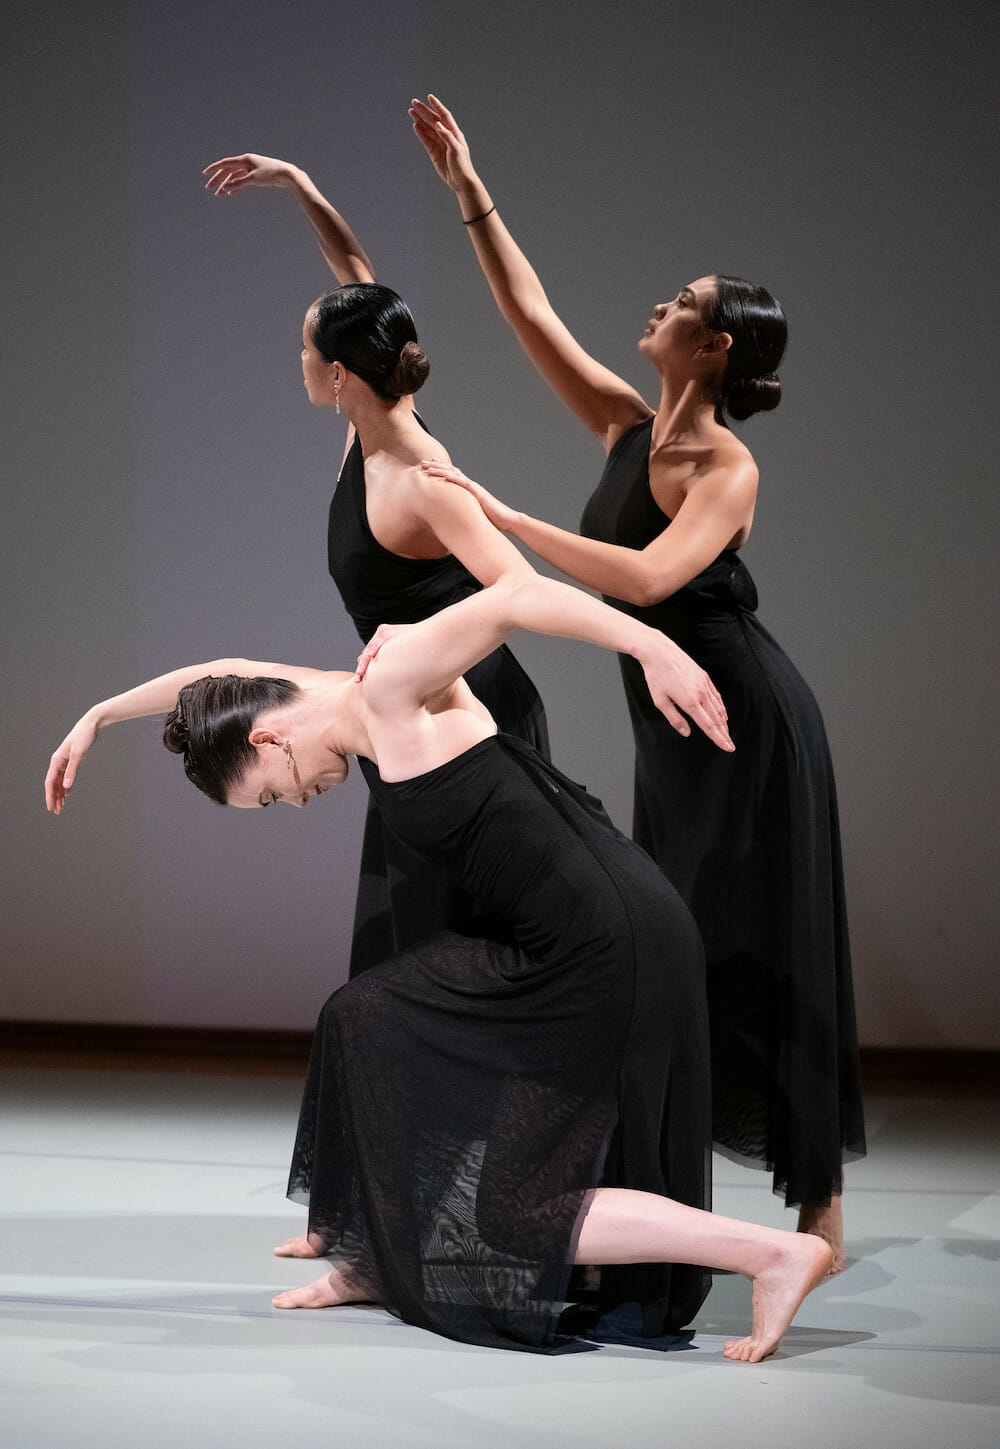 Three women in black dresses pose together with extended arms